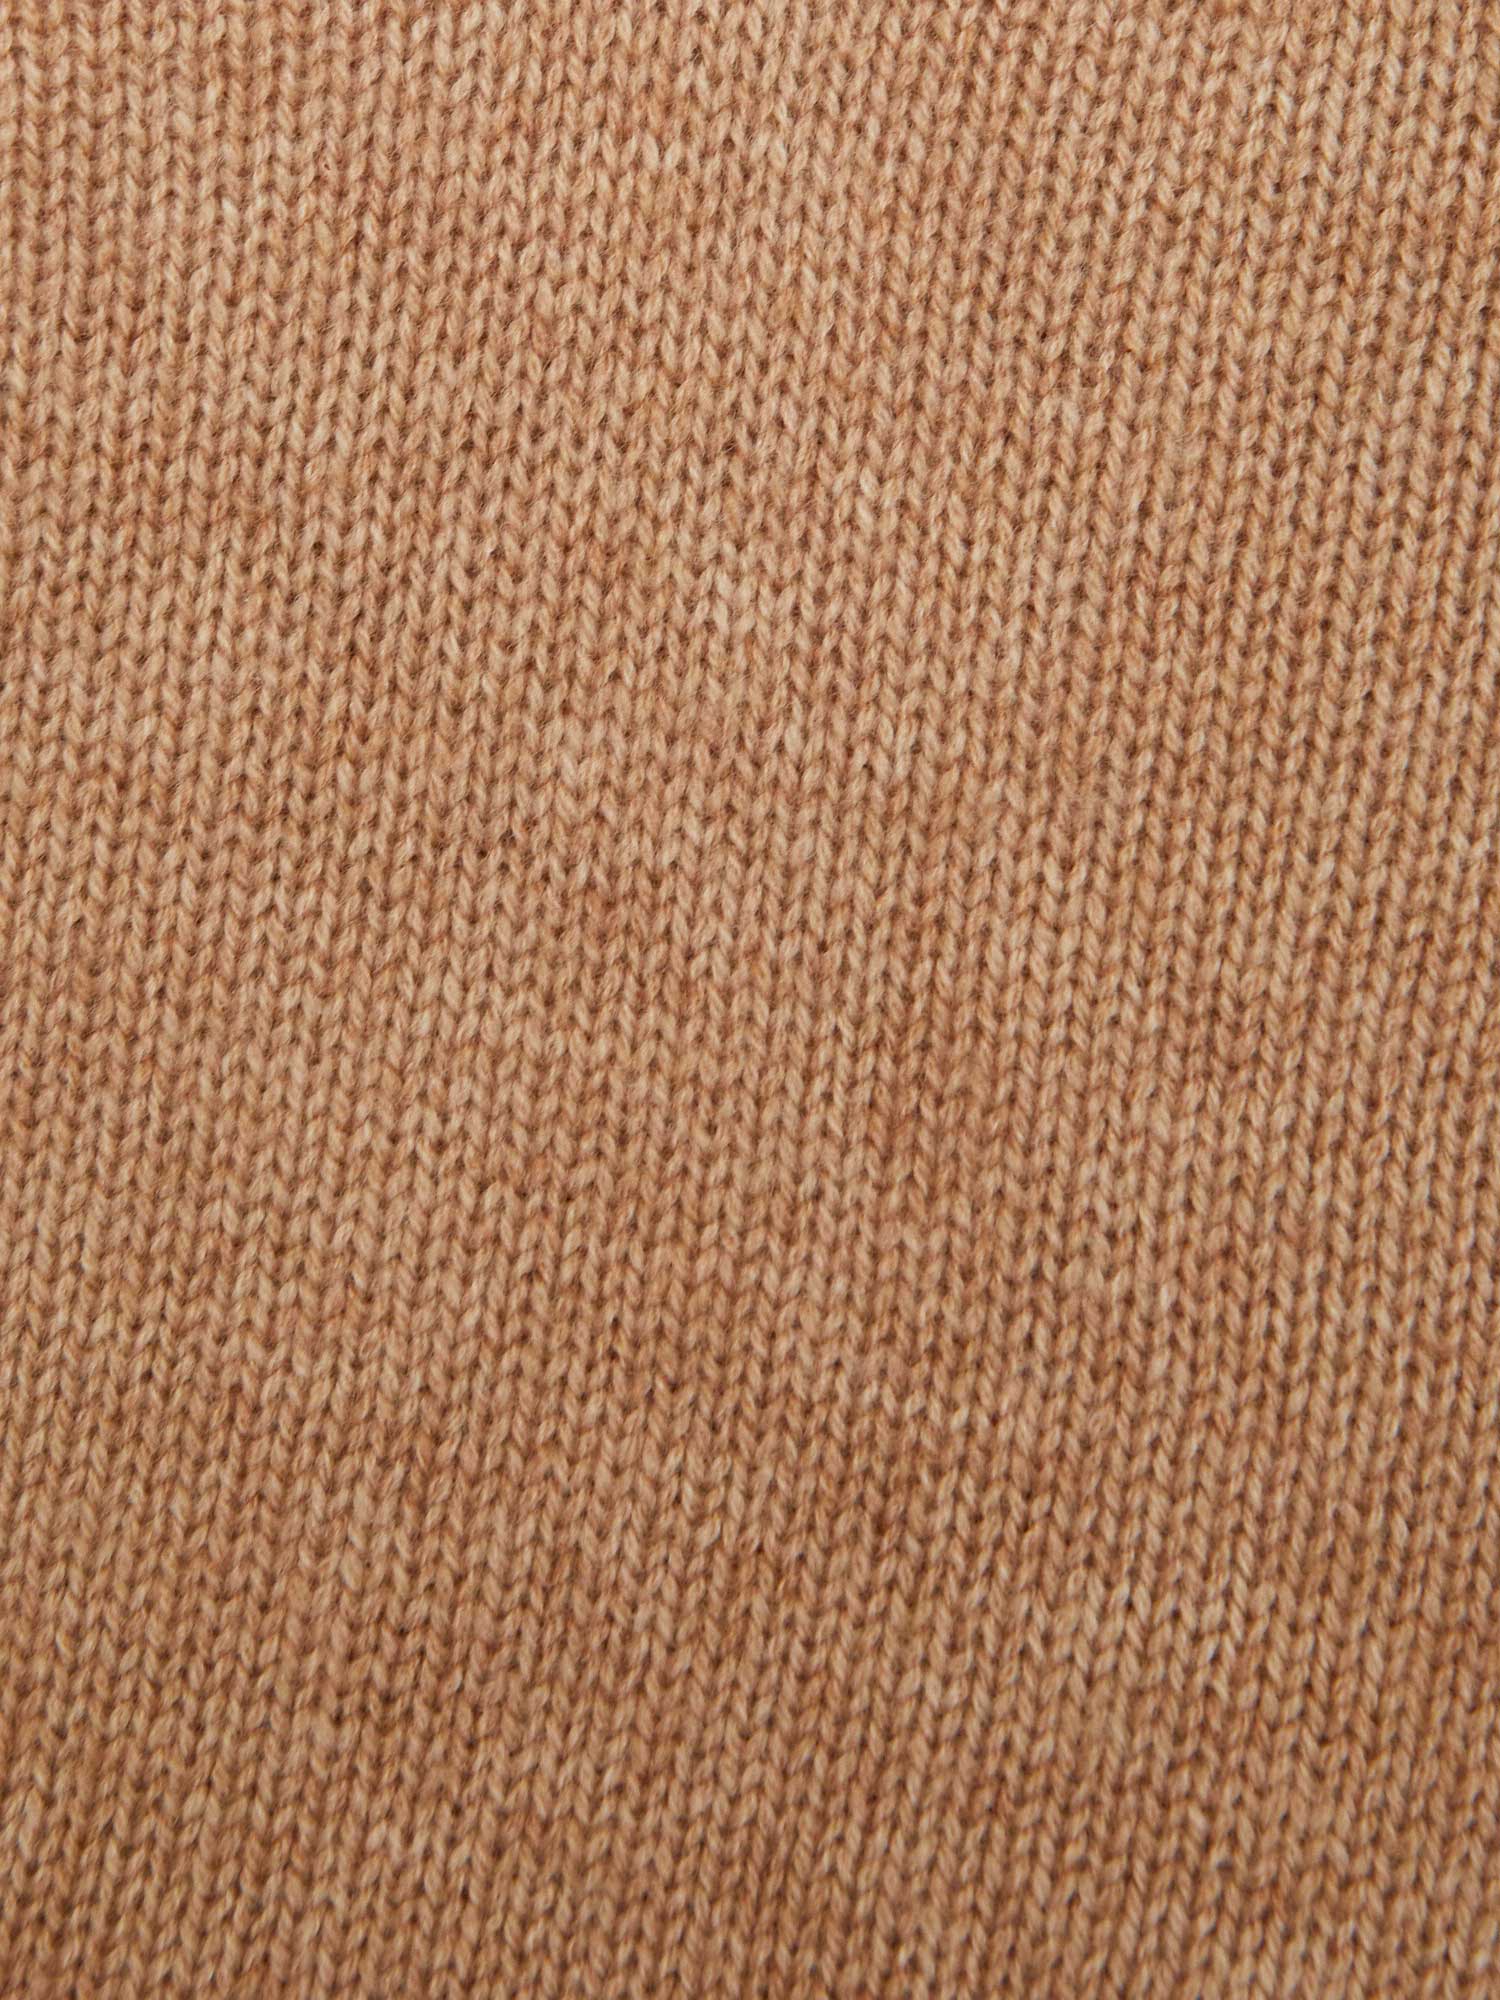 looker tan layered v-neck sweater close up